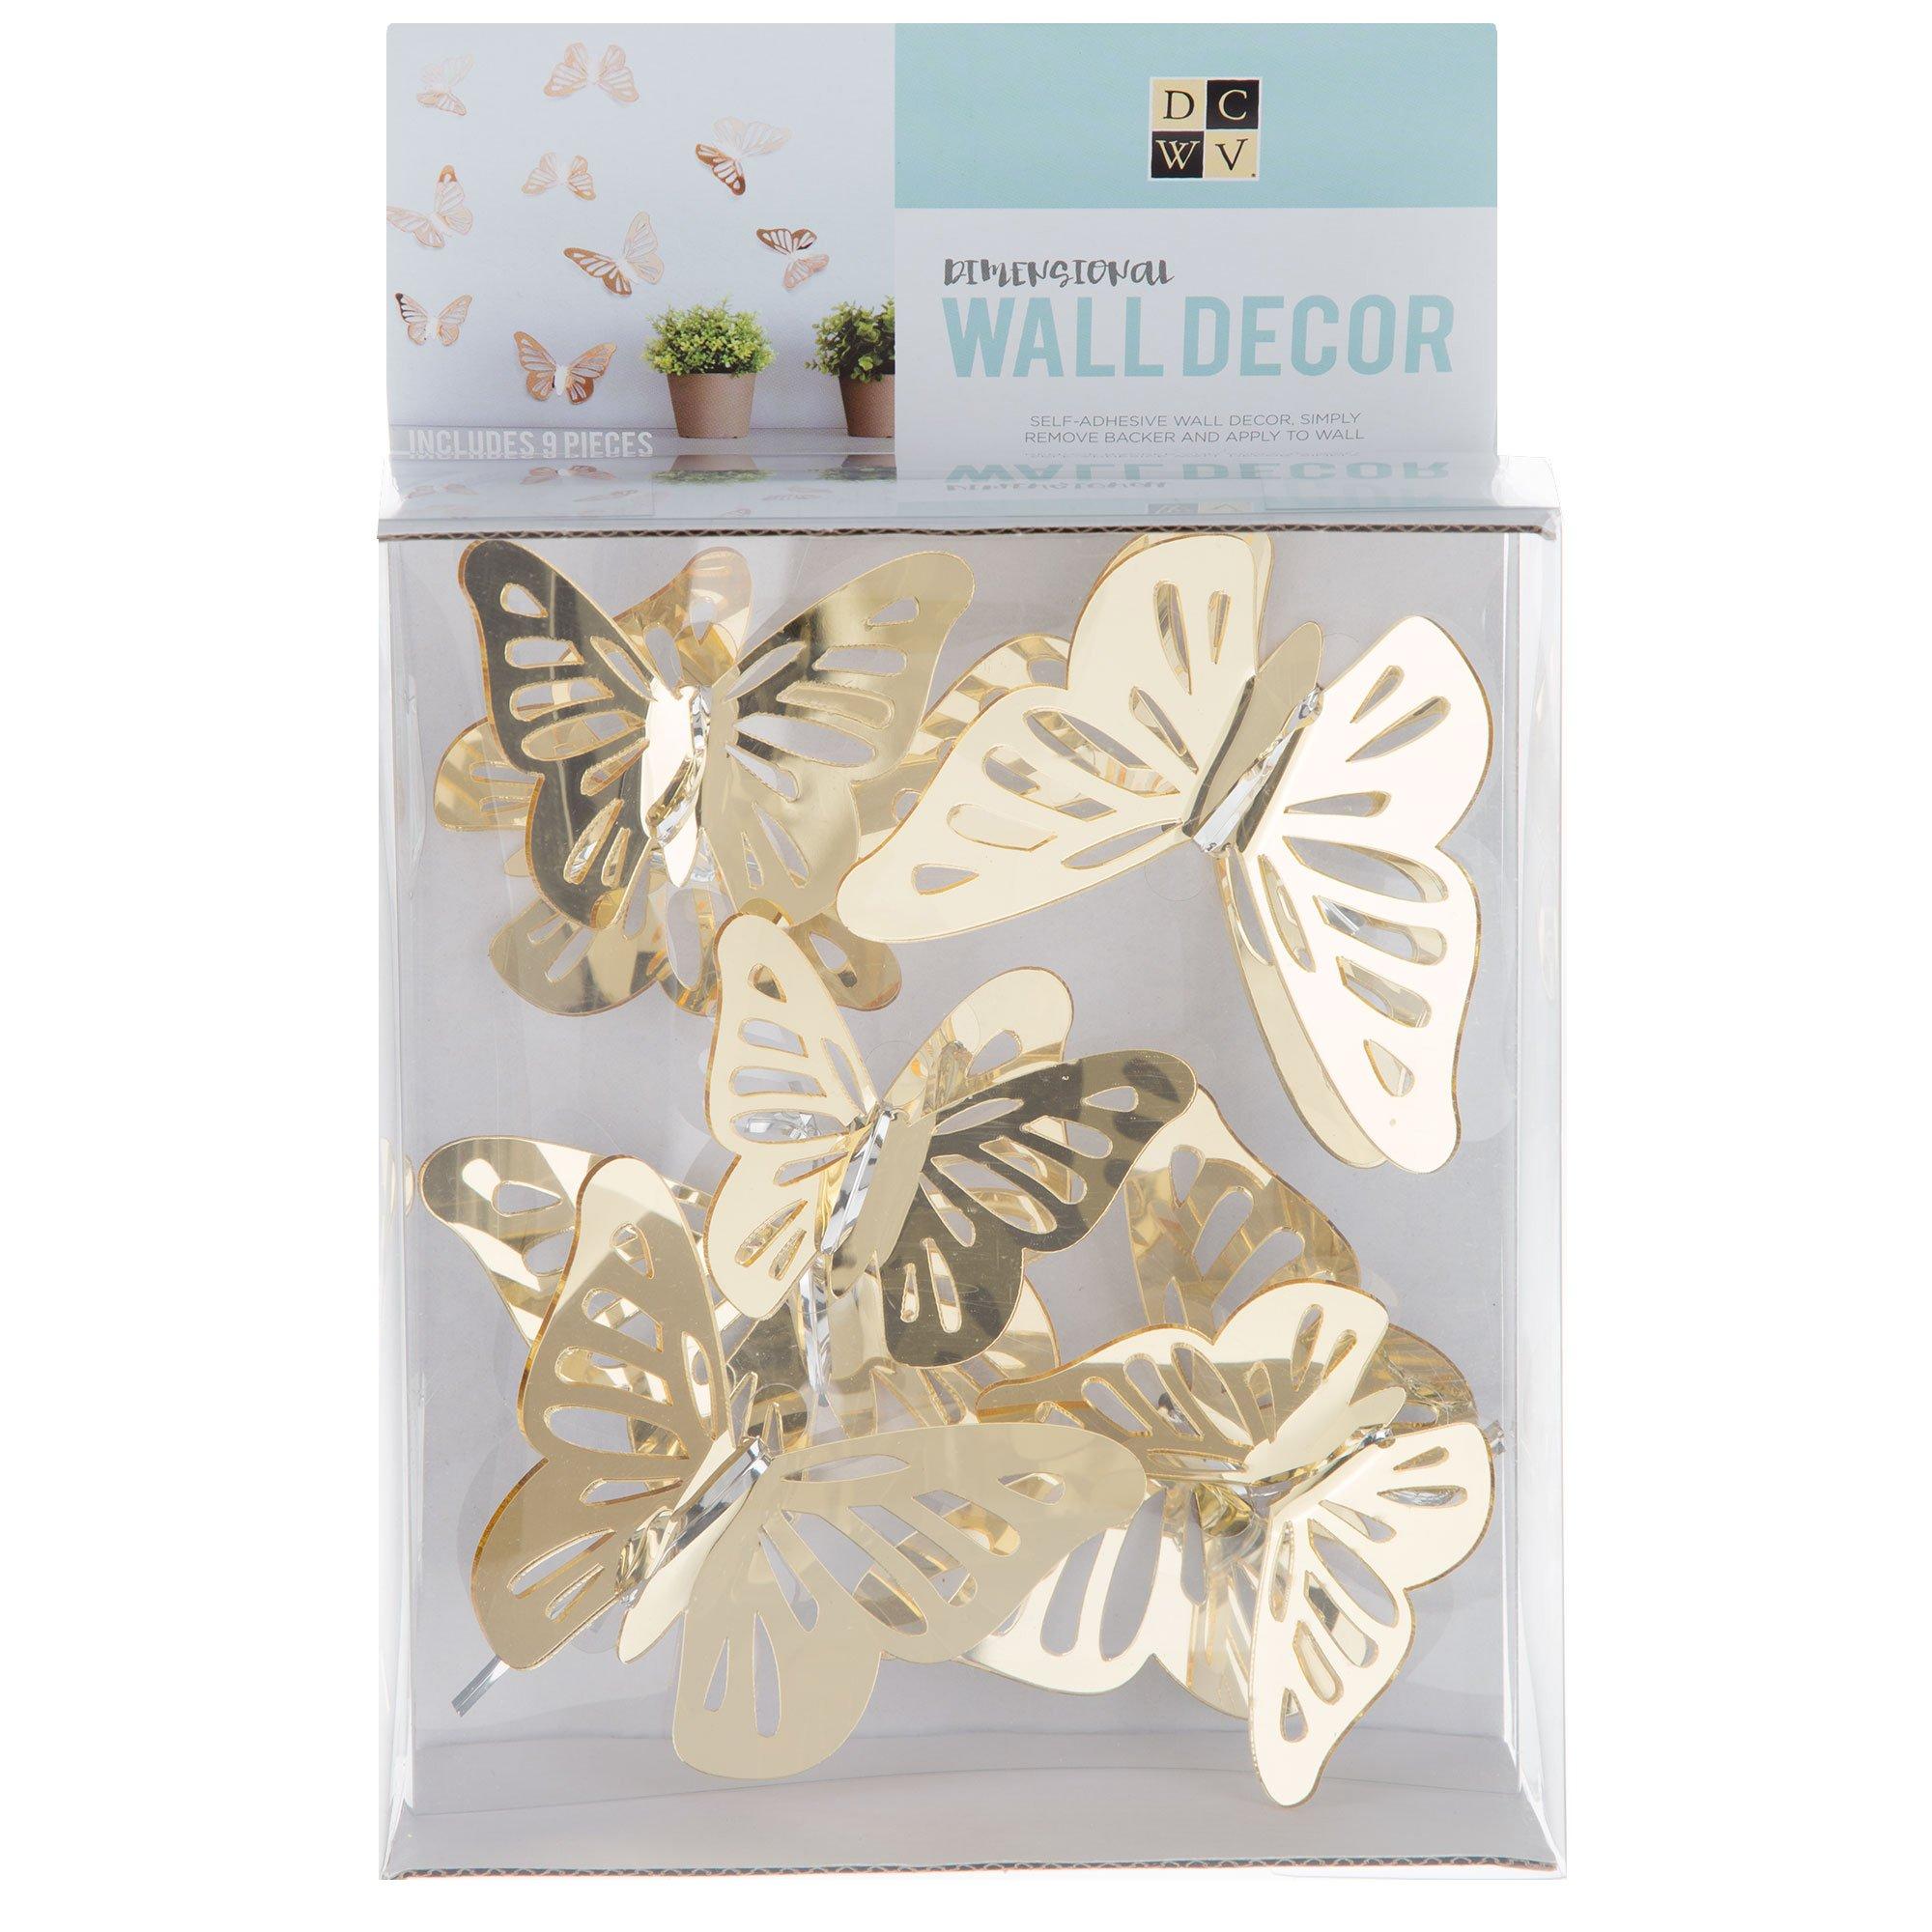 Gold Mirrored 3D Butterfly Peel and Stick Wall Decals 10 Piece by World Market